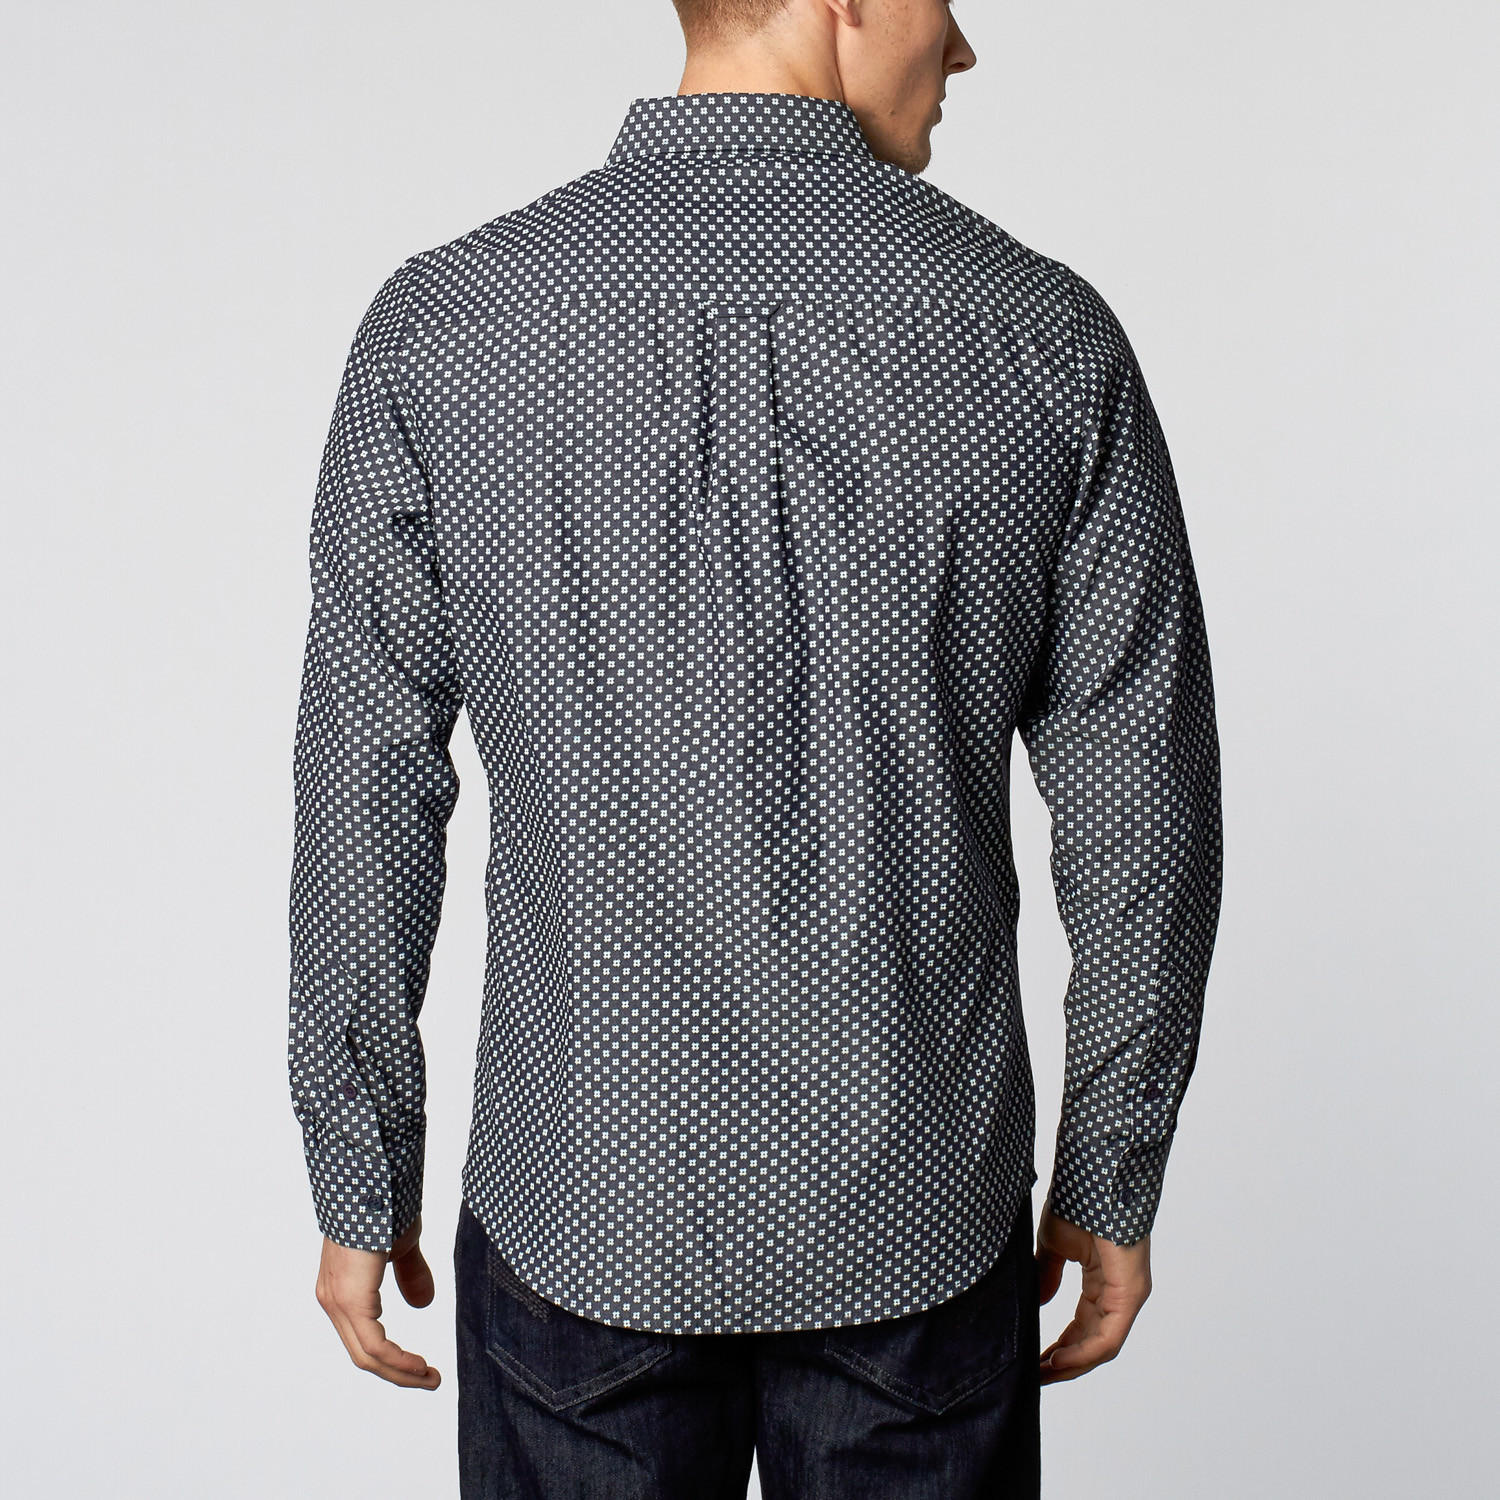 Woven Patterned Button-Up Shirt // Navy (S) - Smash Trends: Weekend ...